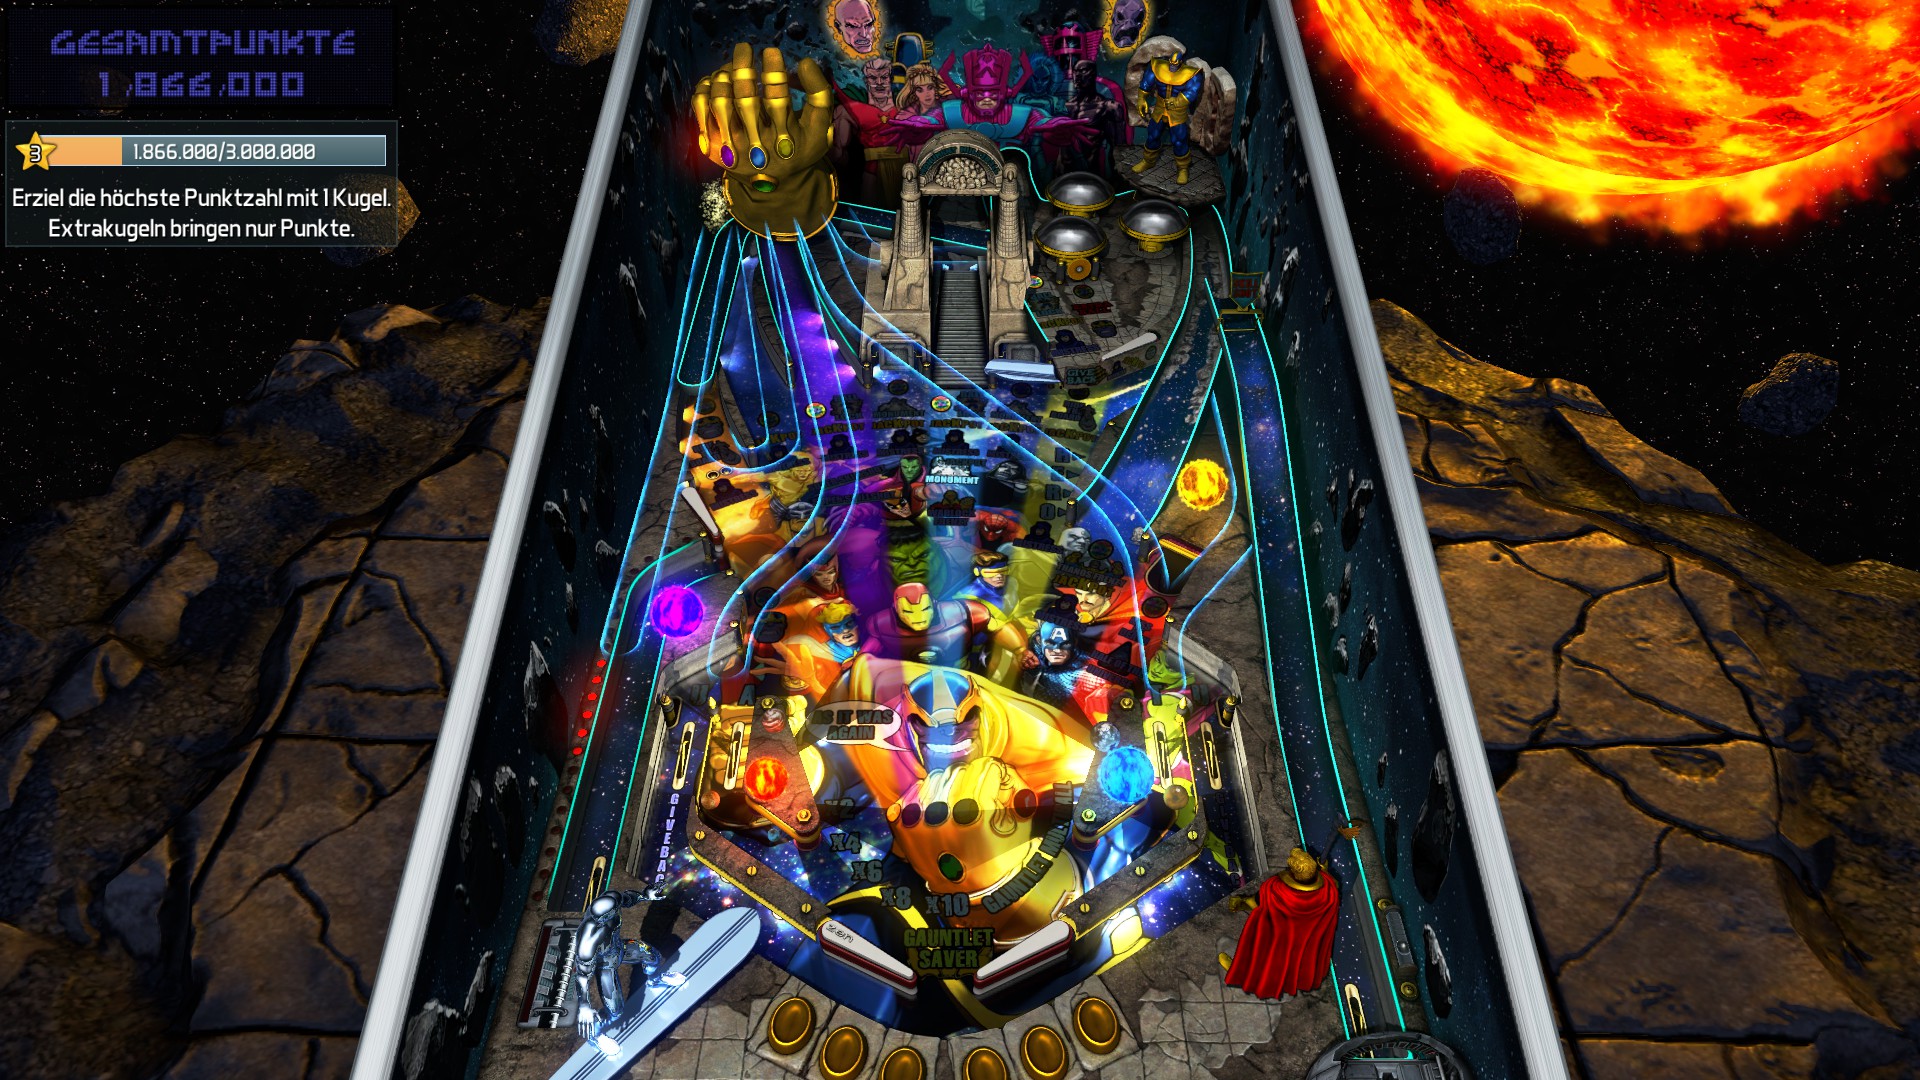 e2e4: Pinball FX3: The Infinity Gauntlet [1 Ball] (PC) 1,866,000 points on 2022-06-16 00:57:06